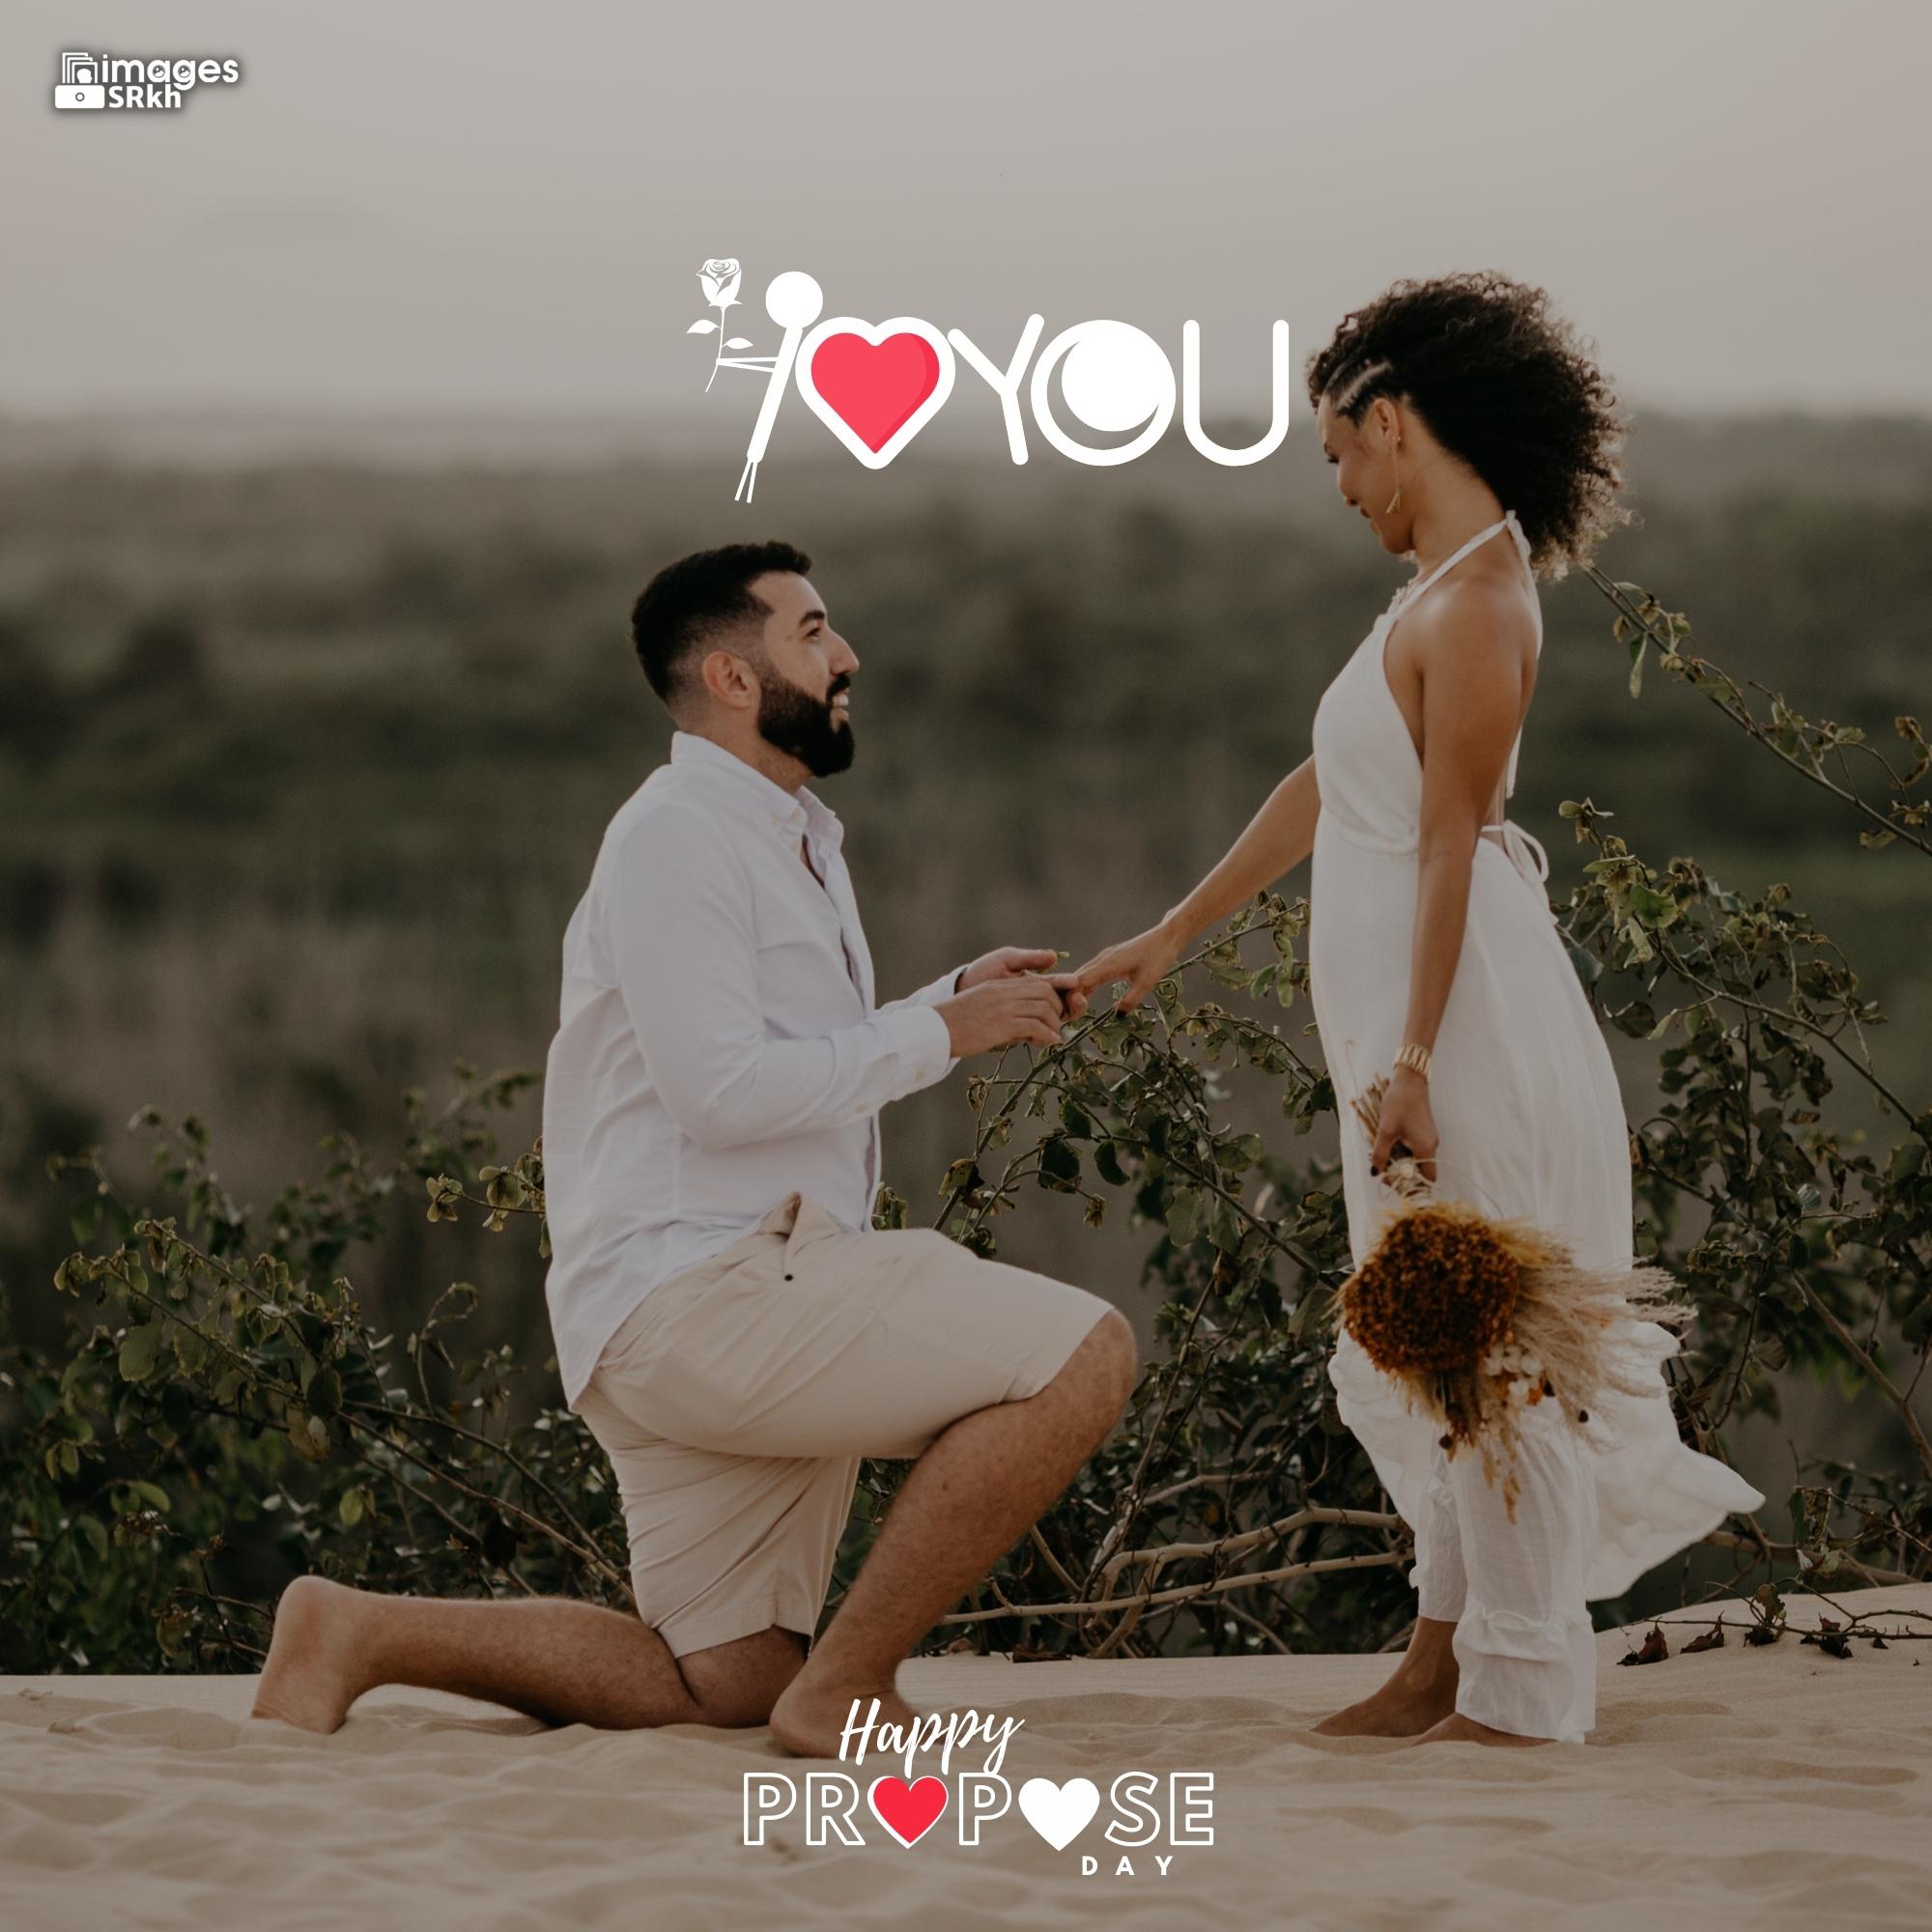 Happy Propose Day Images | 327 | I LOVE YOU